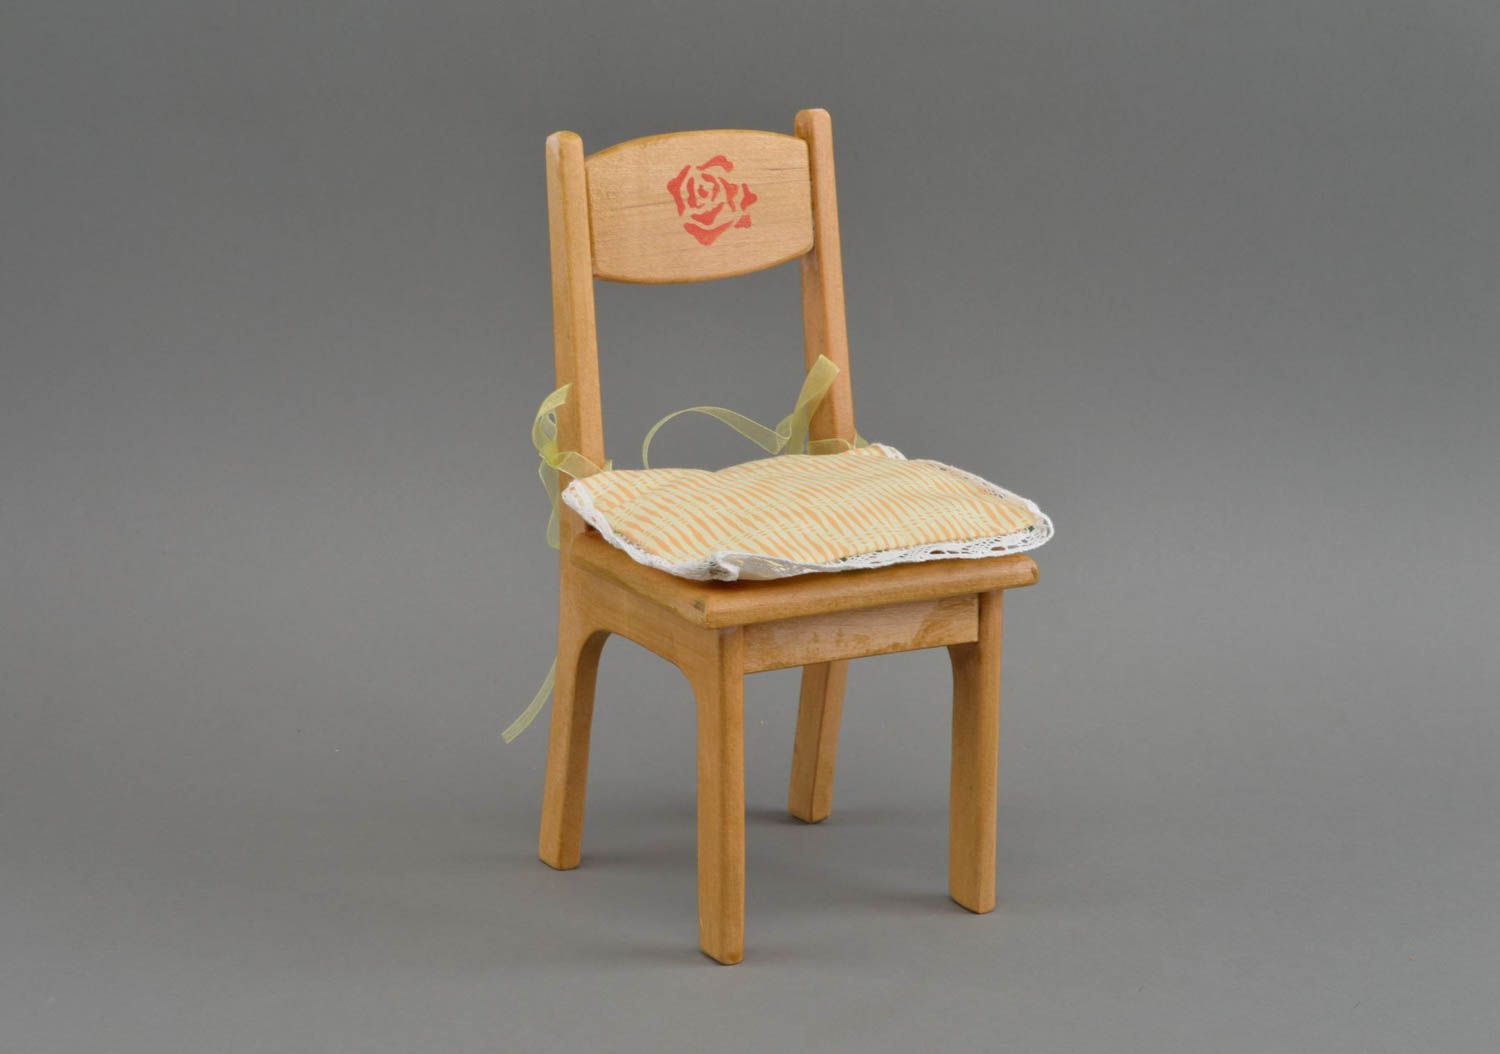 Handmade chair for dolls wooden doll furniture decorative chair gift for baby photo 1